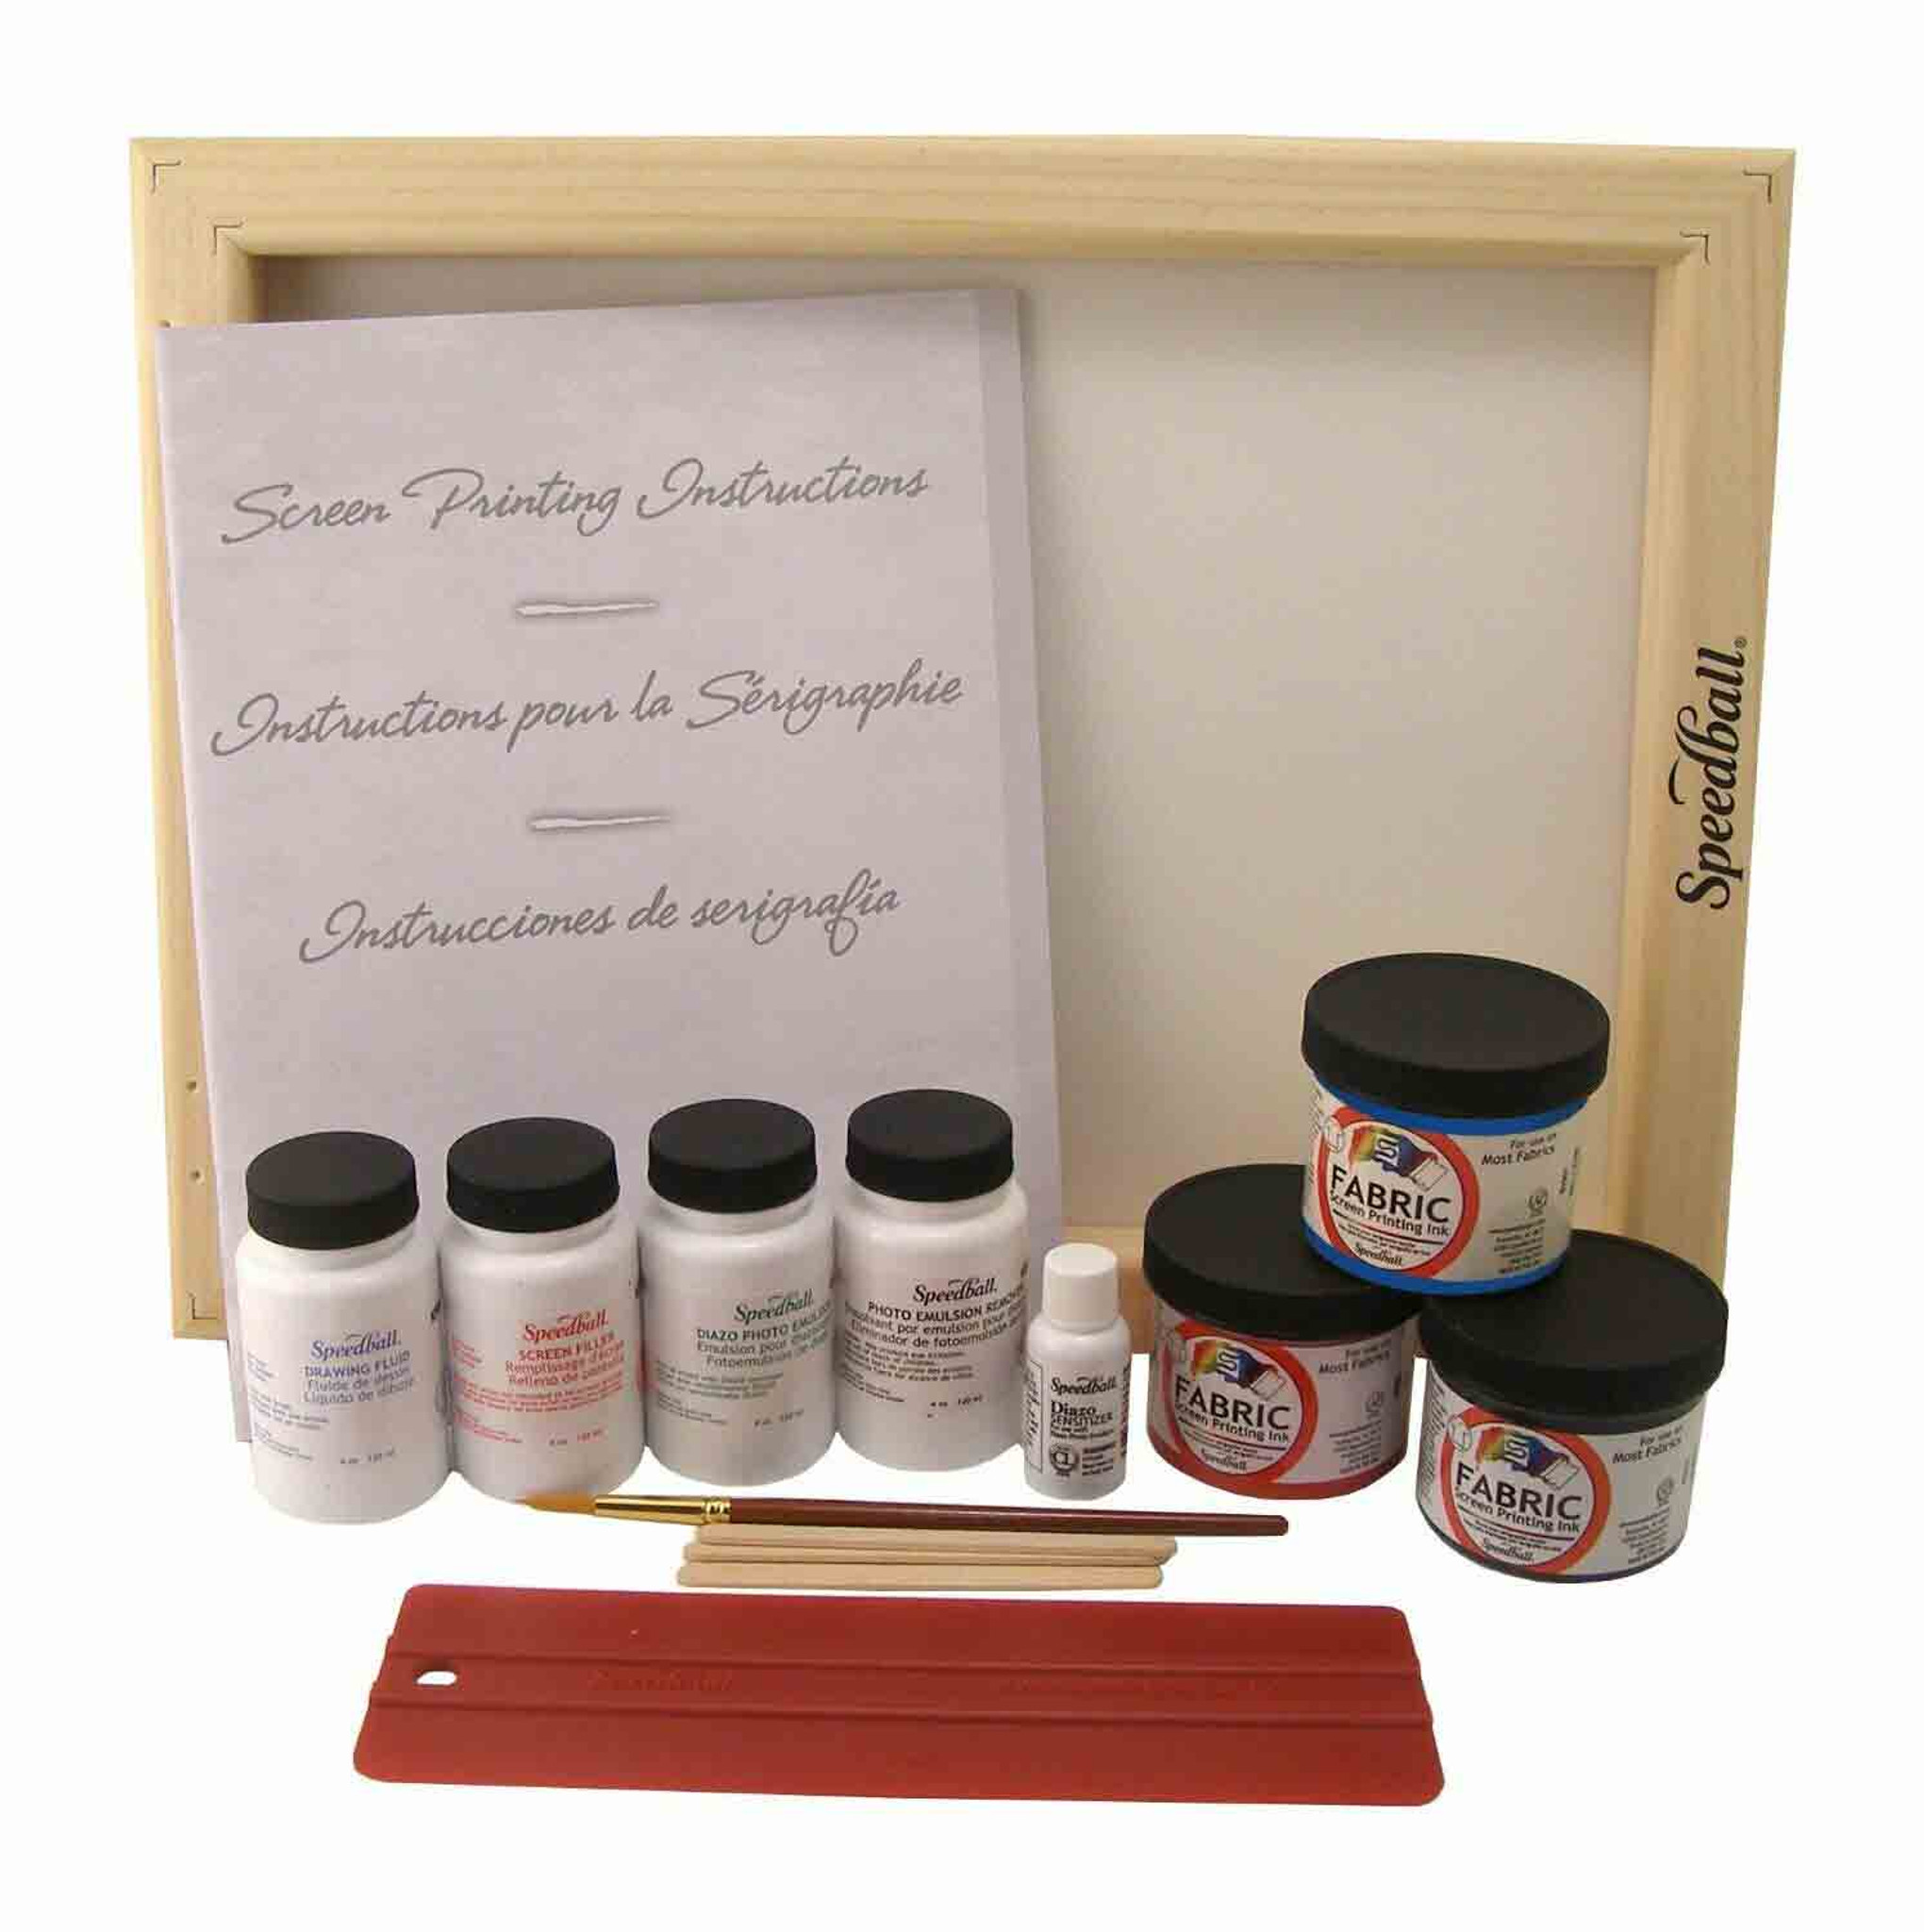 SPEEDBALL ART PRODUCTS 4526 SUPER VALUE FABRIC SCREEN PRINTING KIT | Sealed  New